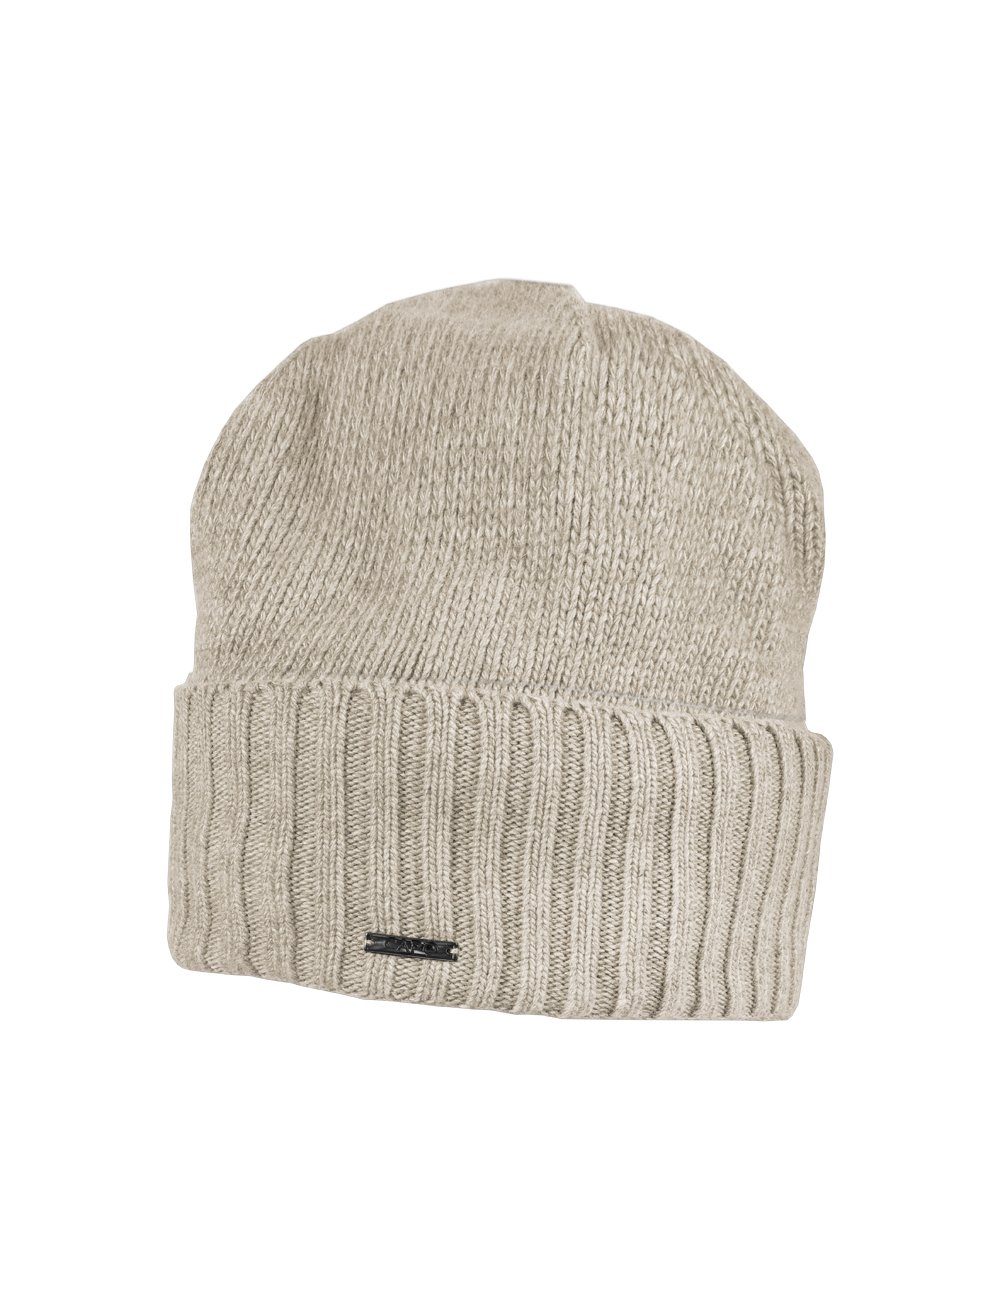 CAPO Strickmütze CAPO-HEAVEN CAP plain knitted cap, ribbed turn up Made in Europe beige